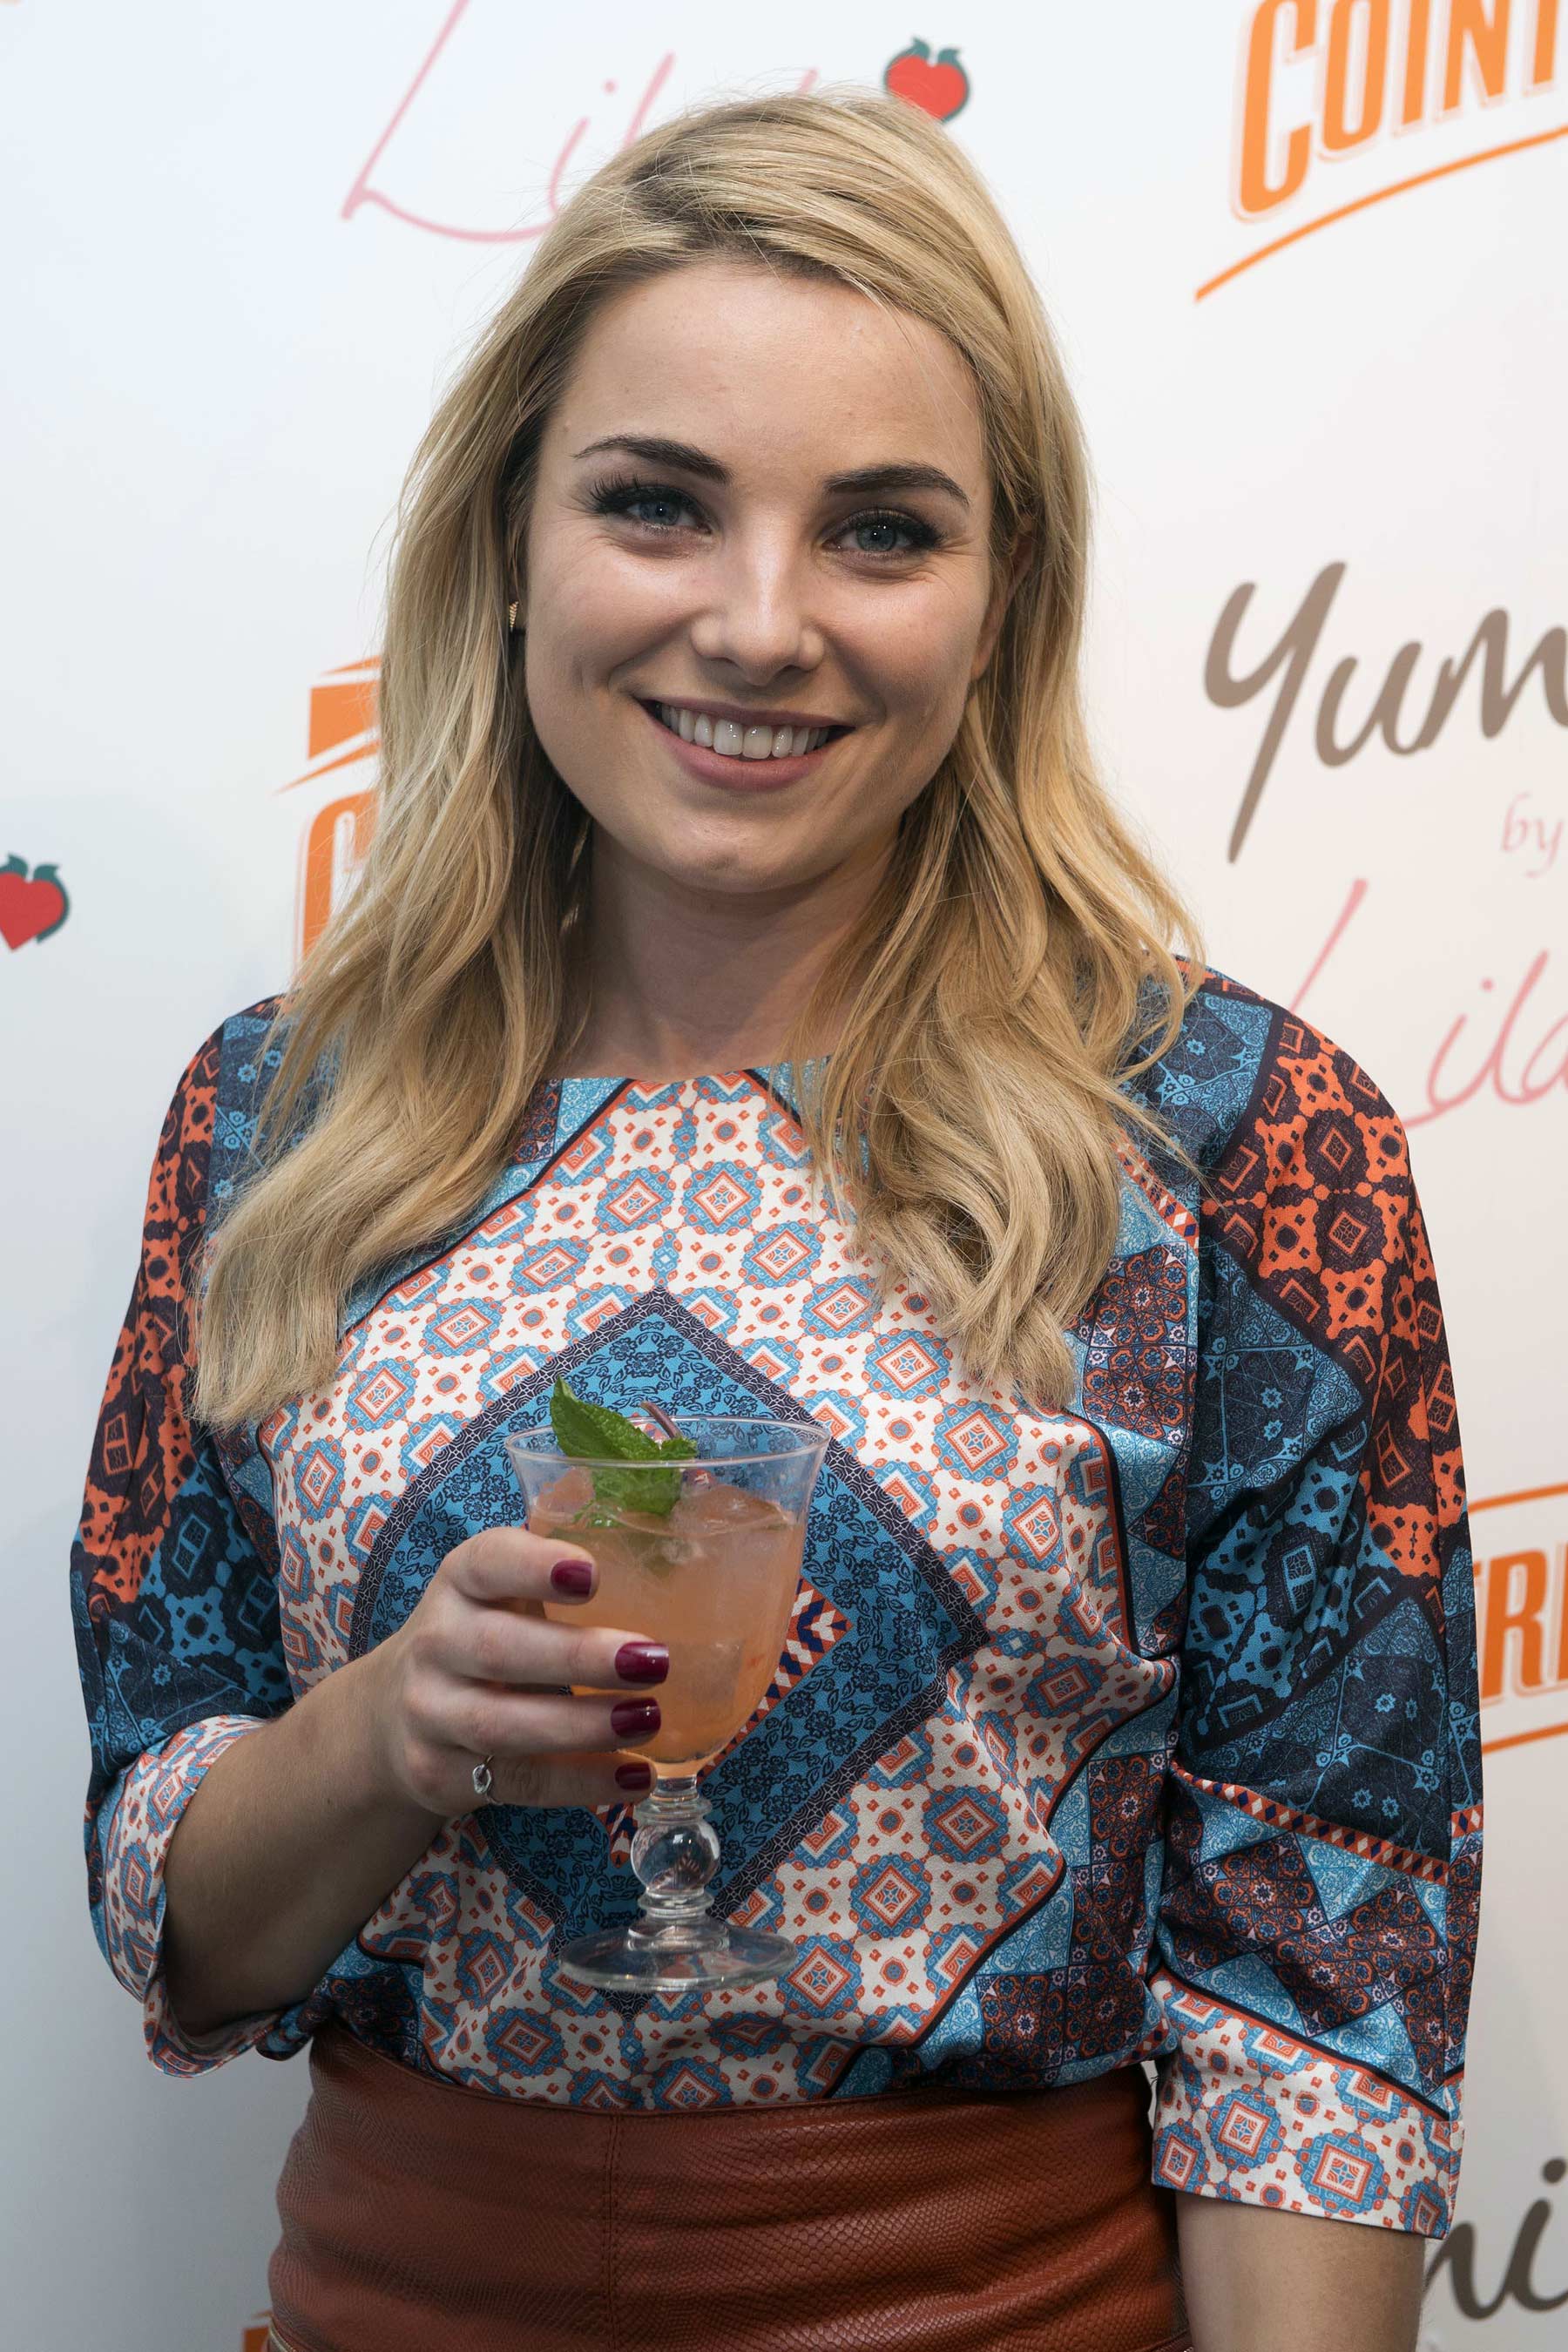 Sian Welby attends the Cointreau launch party for Yumi By Lilah SS 2016 collection